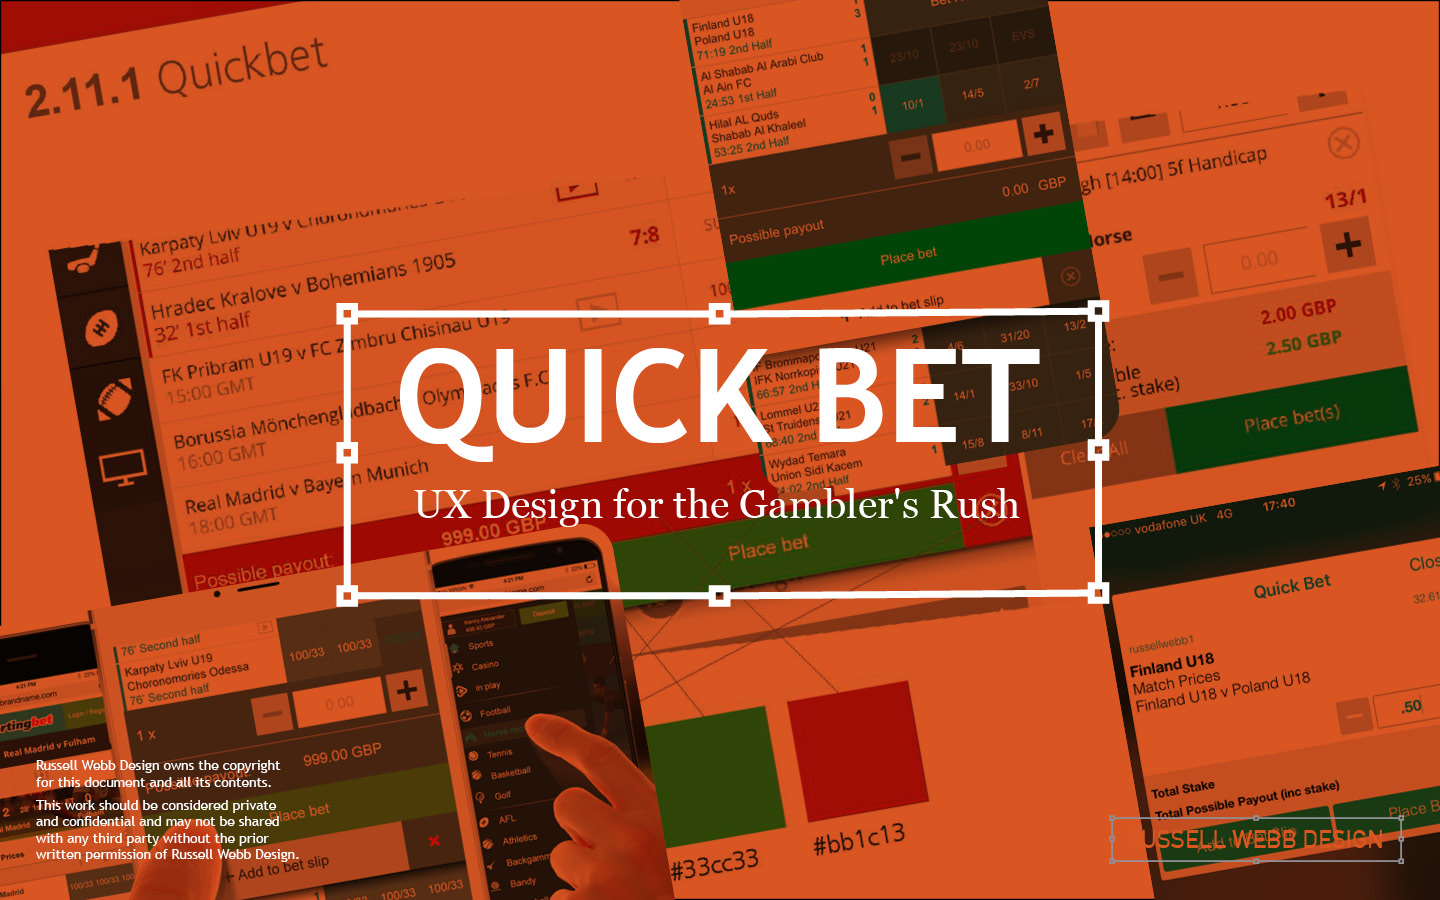 Quick Bet is essential for quickly placing bets on mobile devices. Strong UX handles price changes, suspensions and signal drops without delays. This includes gracefully handling errors, red cards, penalties, and goals that can suspend in-play markets... all lead to bet cancellations. Learn how prototyping and a hands-on design approach can solve user problems.